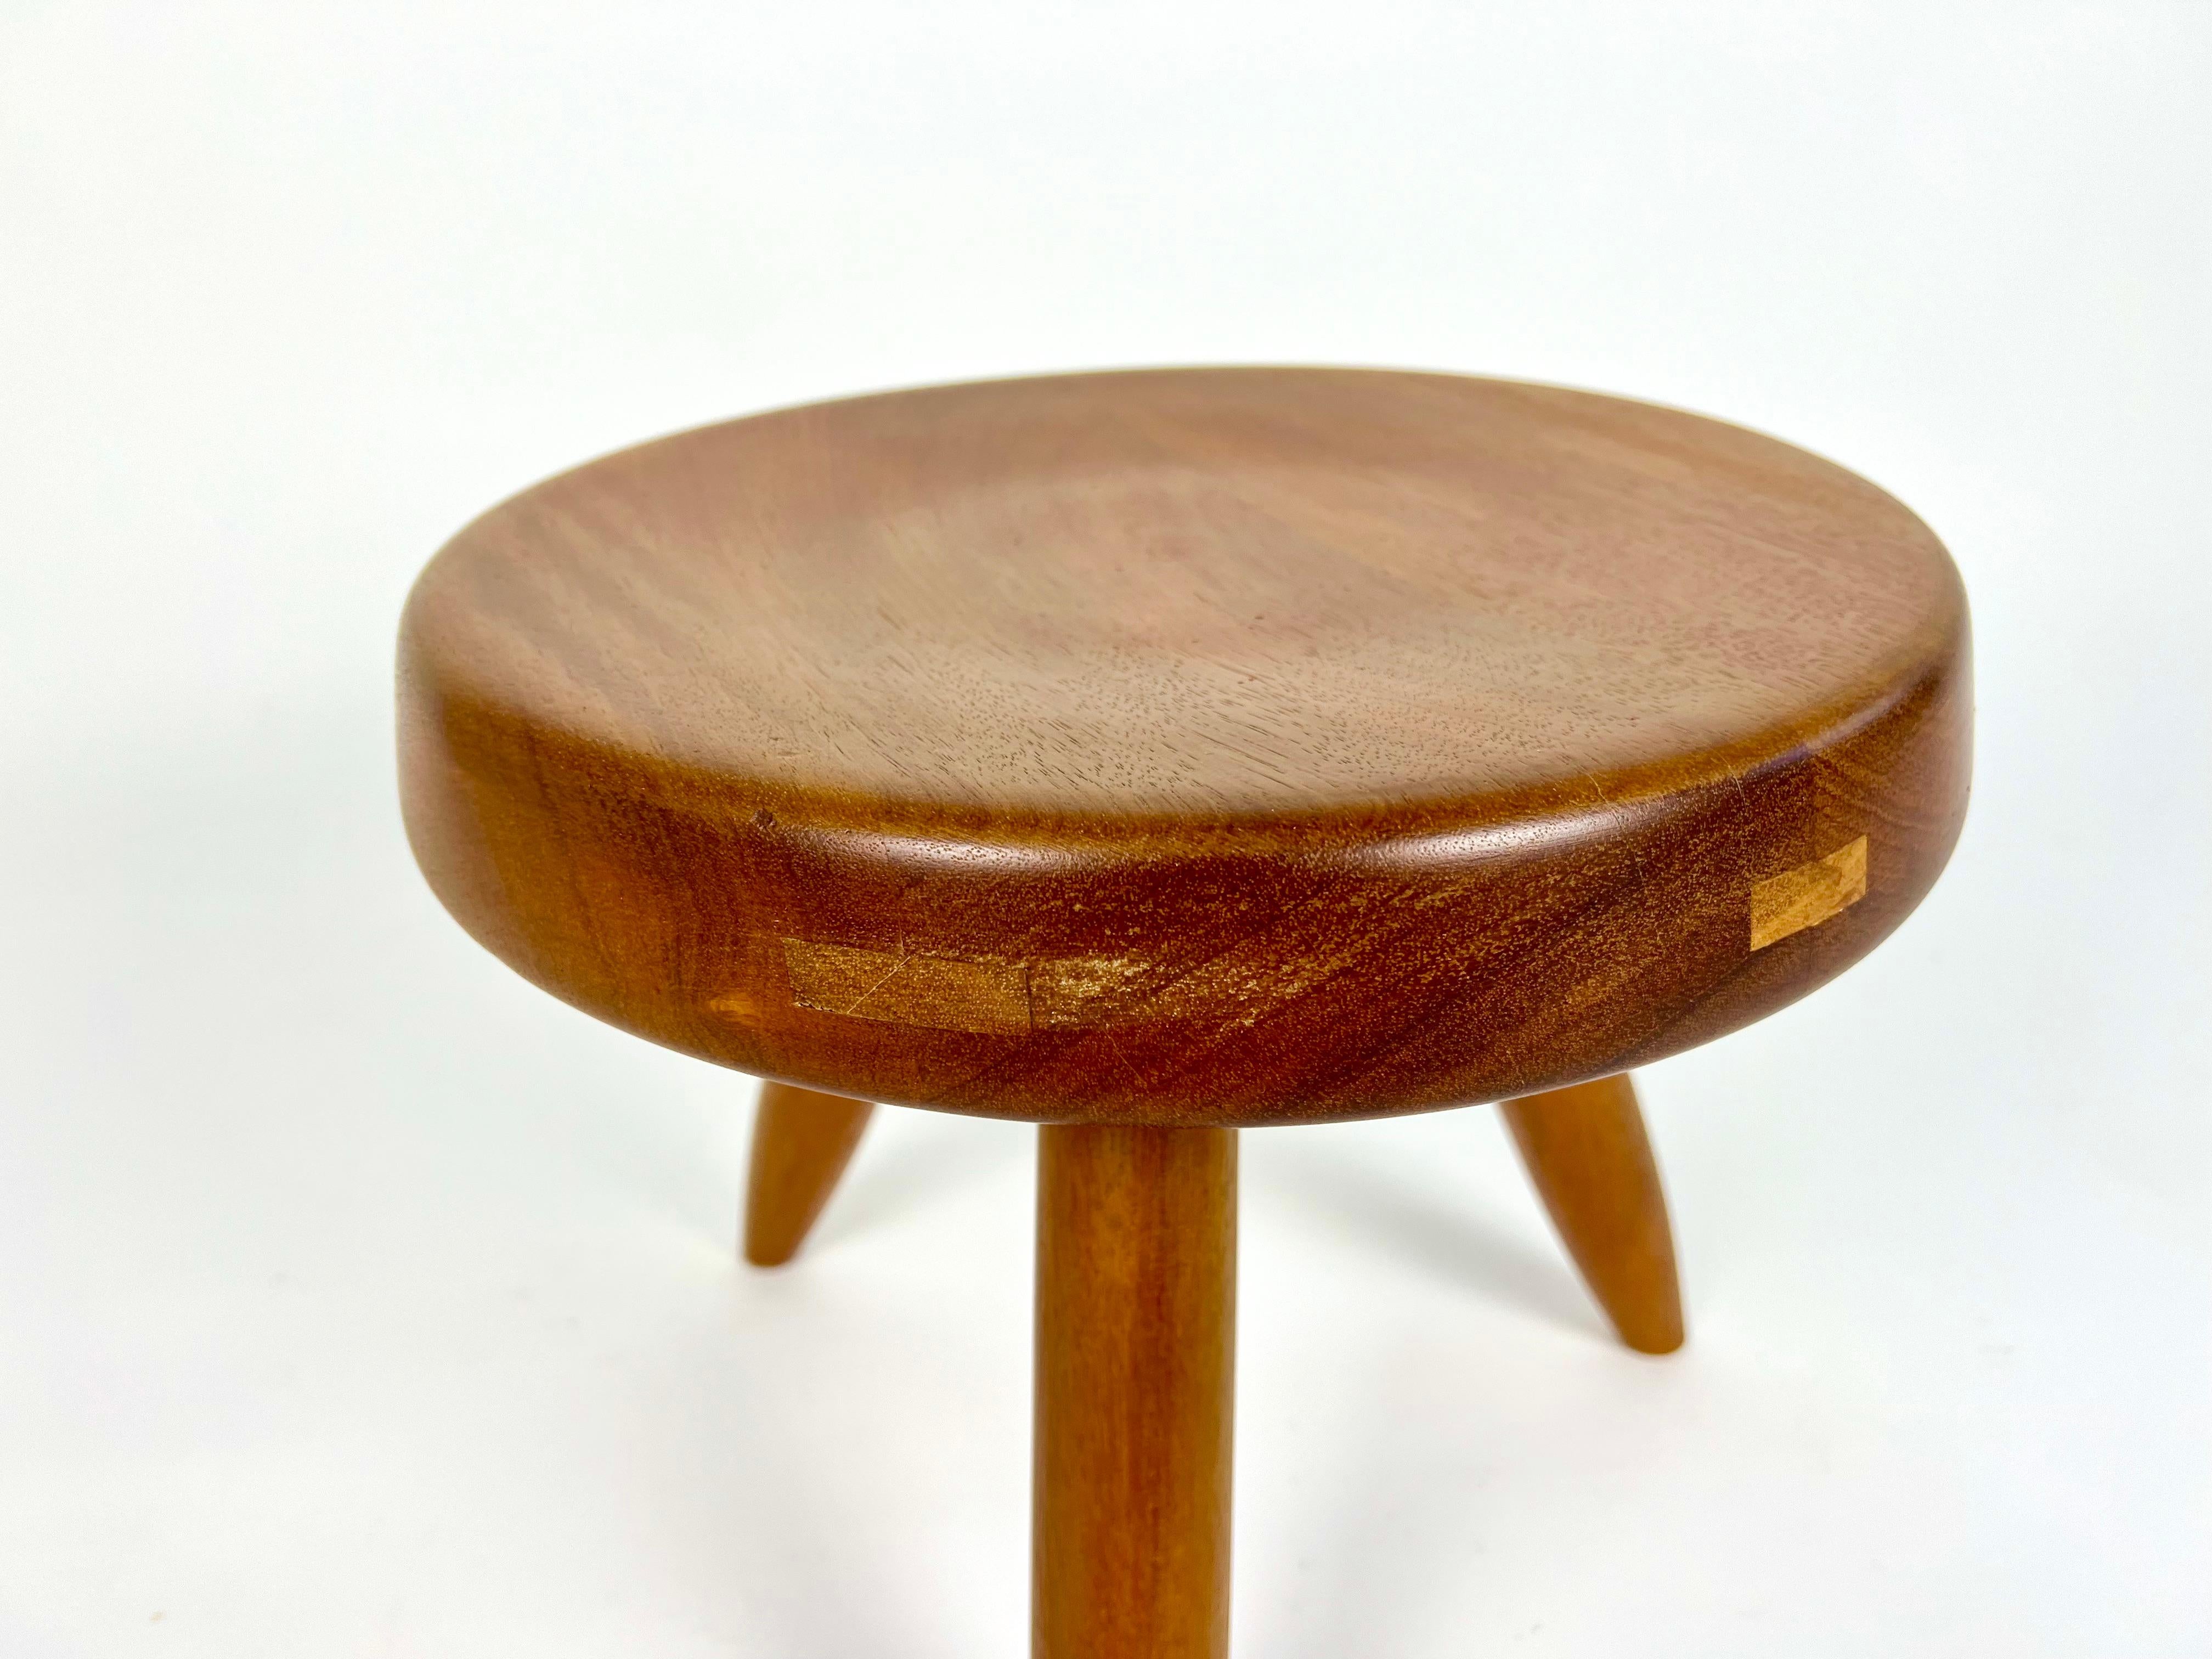 20th Century Berger low stool in mahogany, Charlotte Perriand